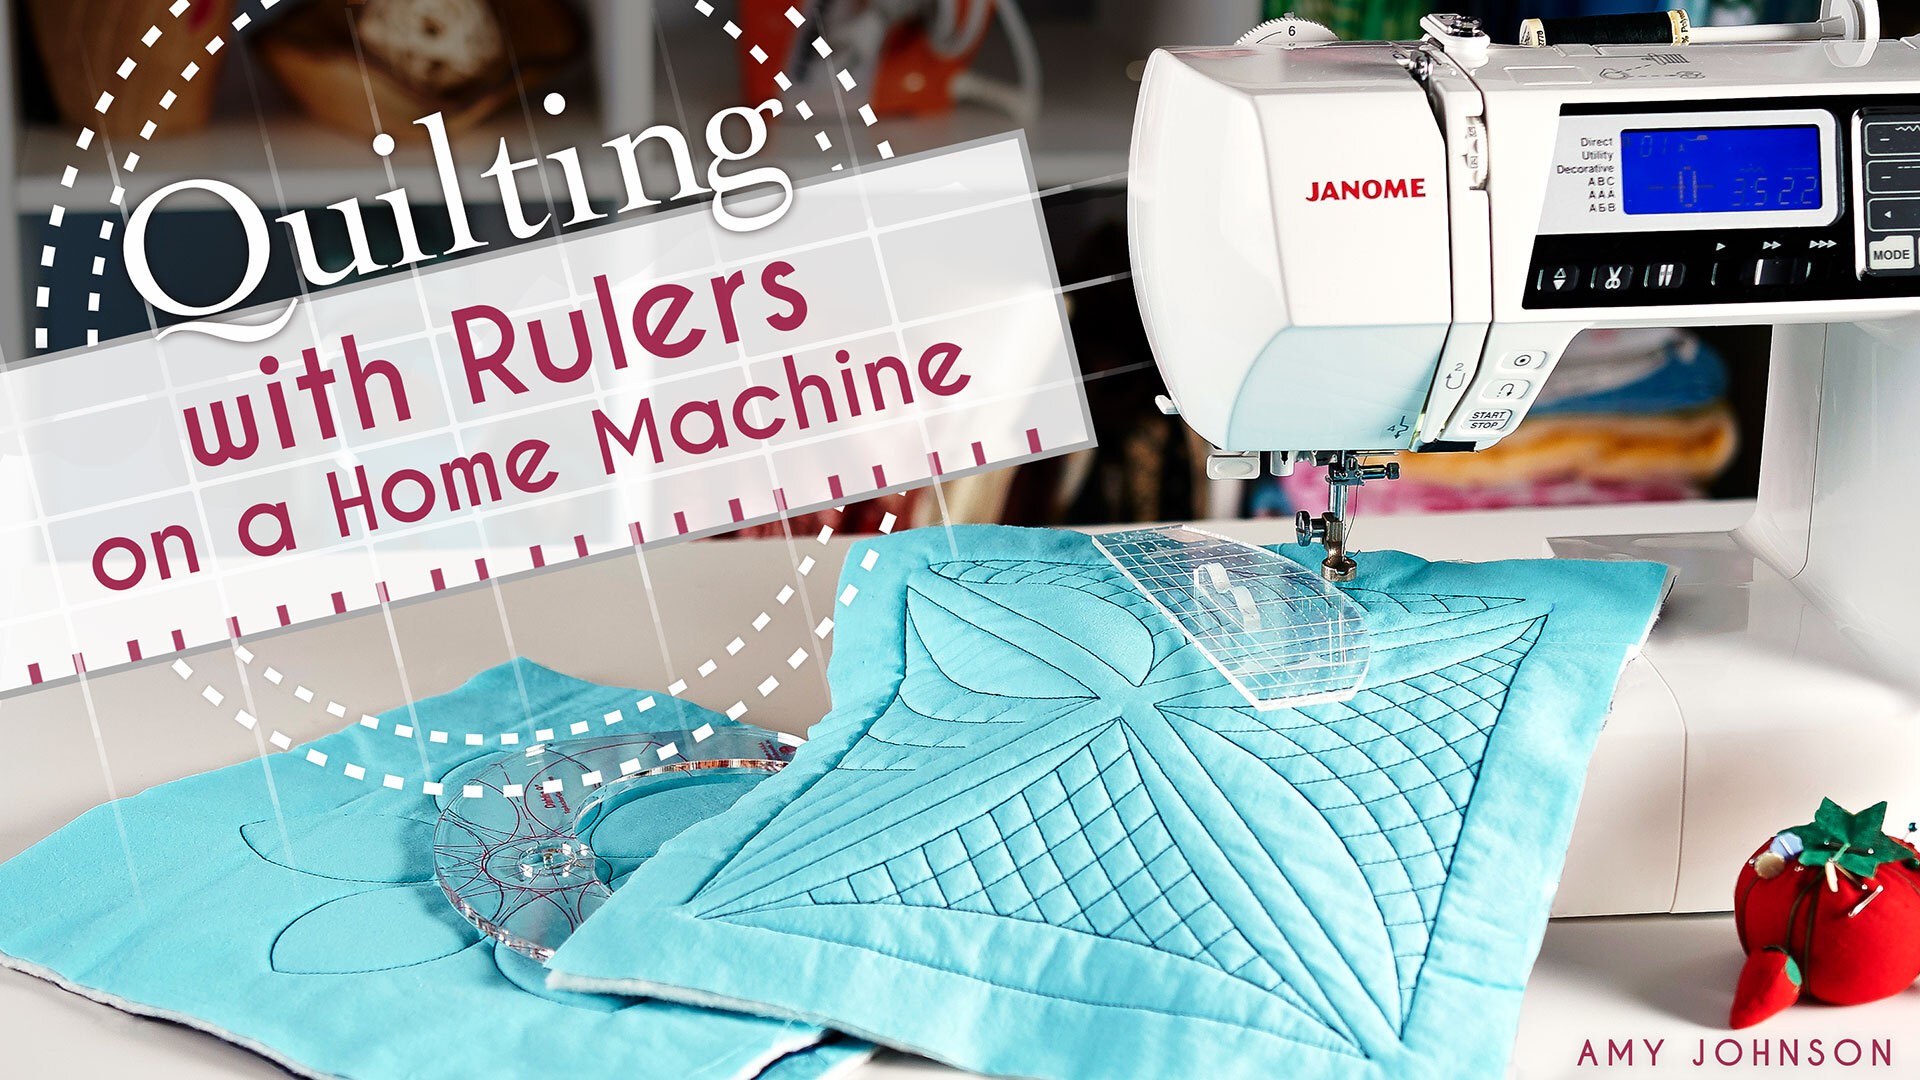 Quilting with machine quilting rulers on a home machine – The